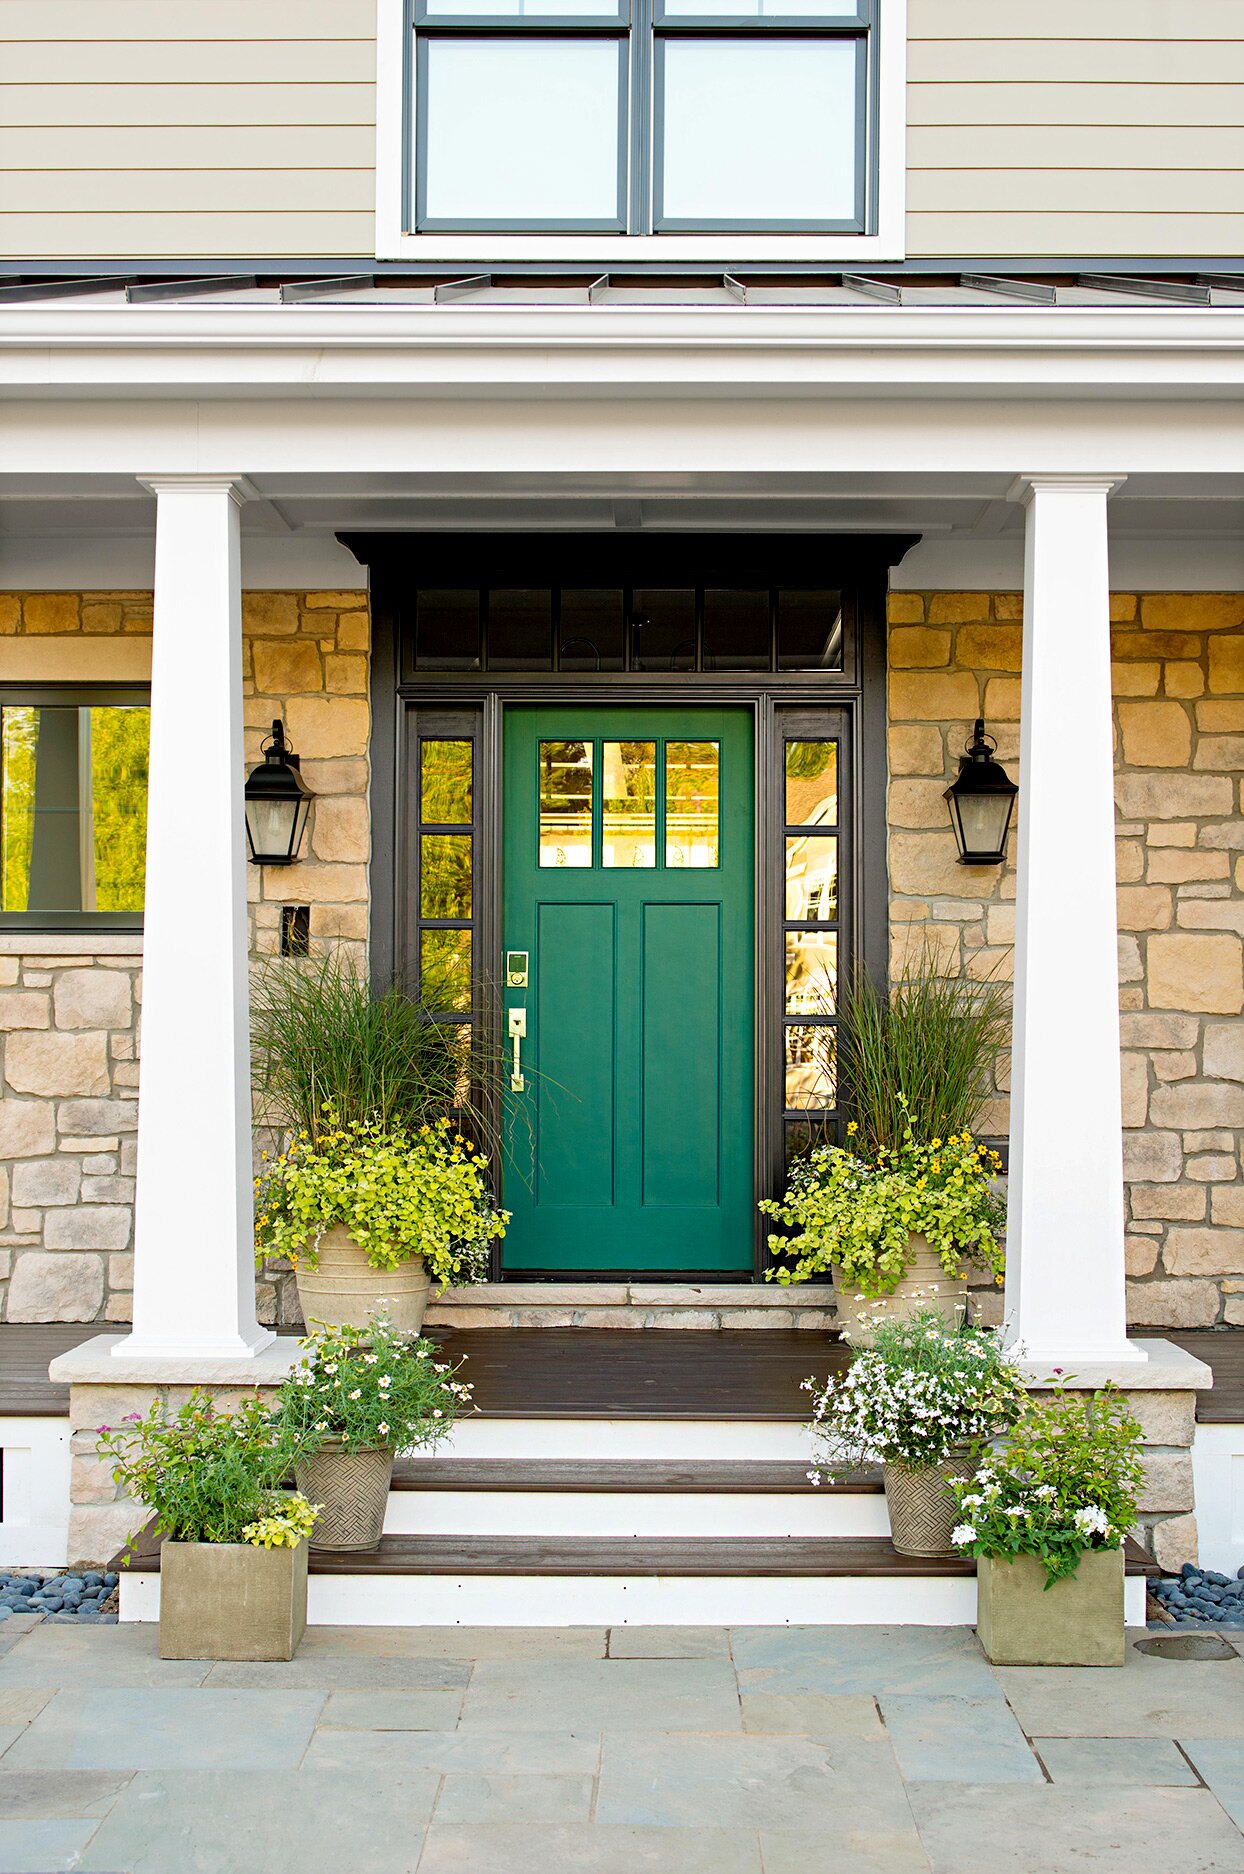 Stone entryway with green door and white pillars